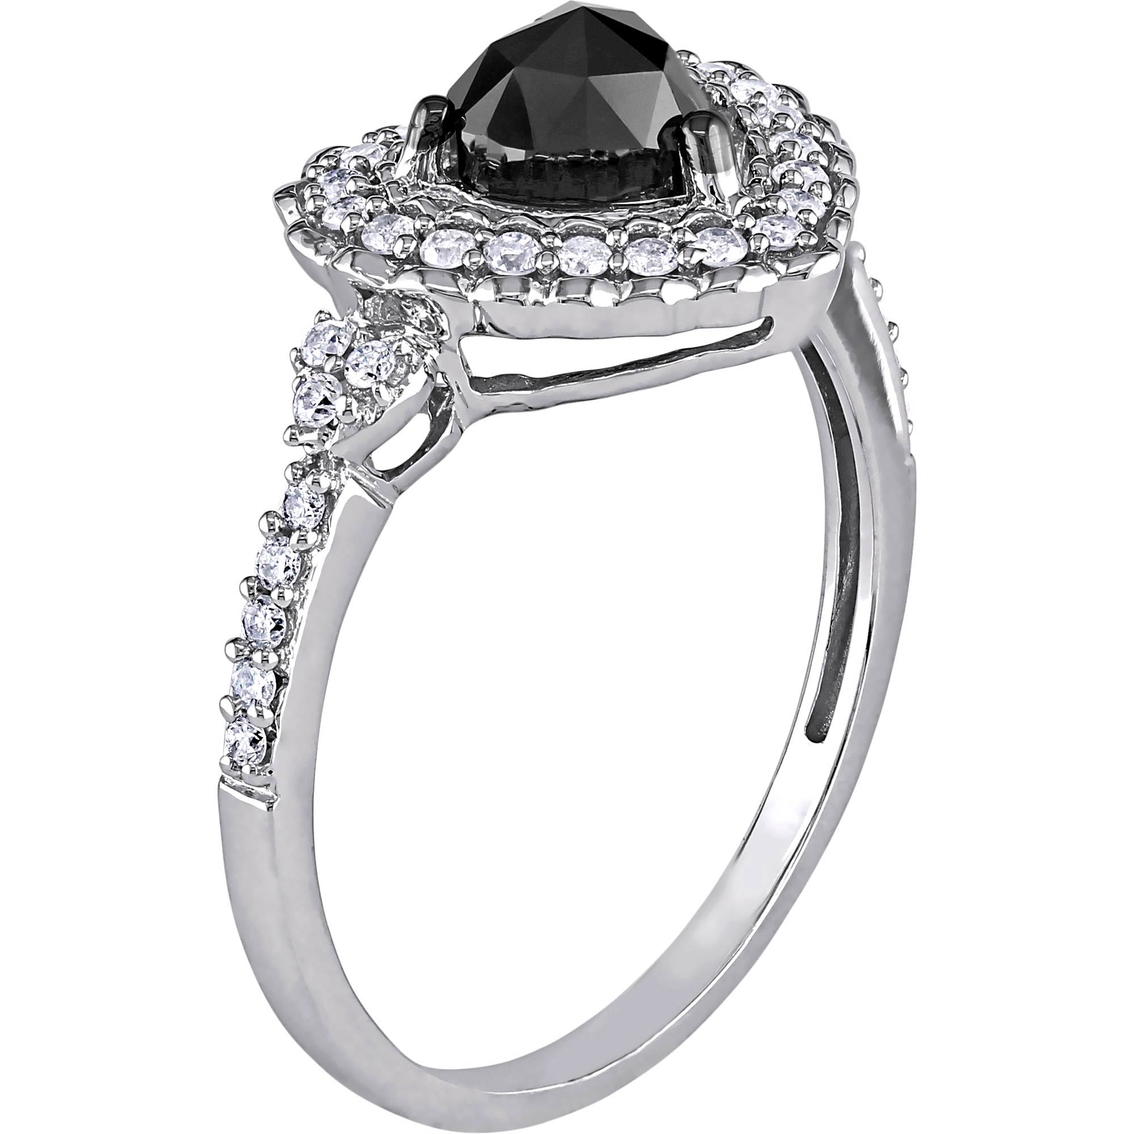 Diamore 1 CTW Black and White Diamond Halo Heart Ring in 10k White Gold - Image 2 of 3